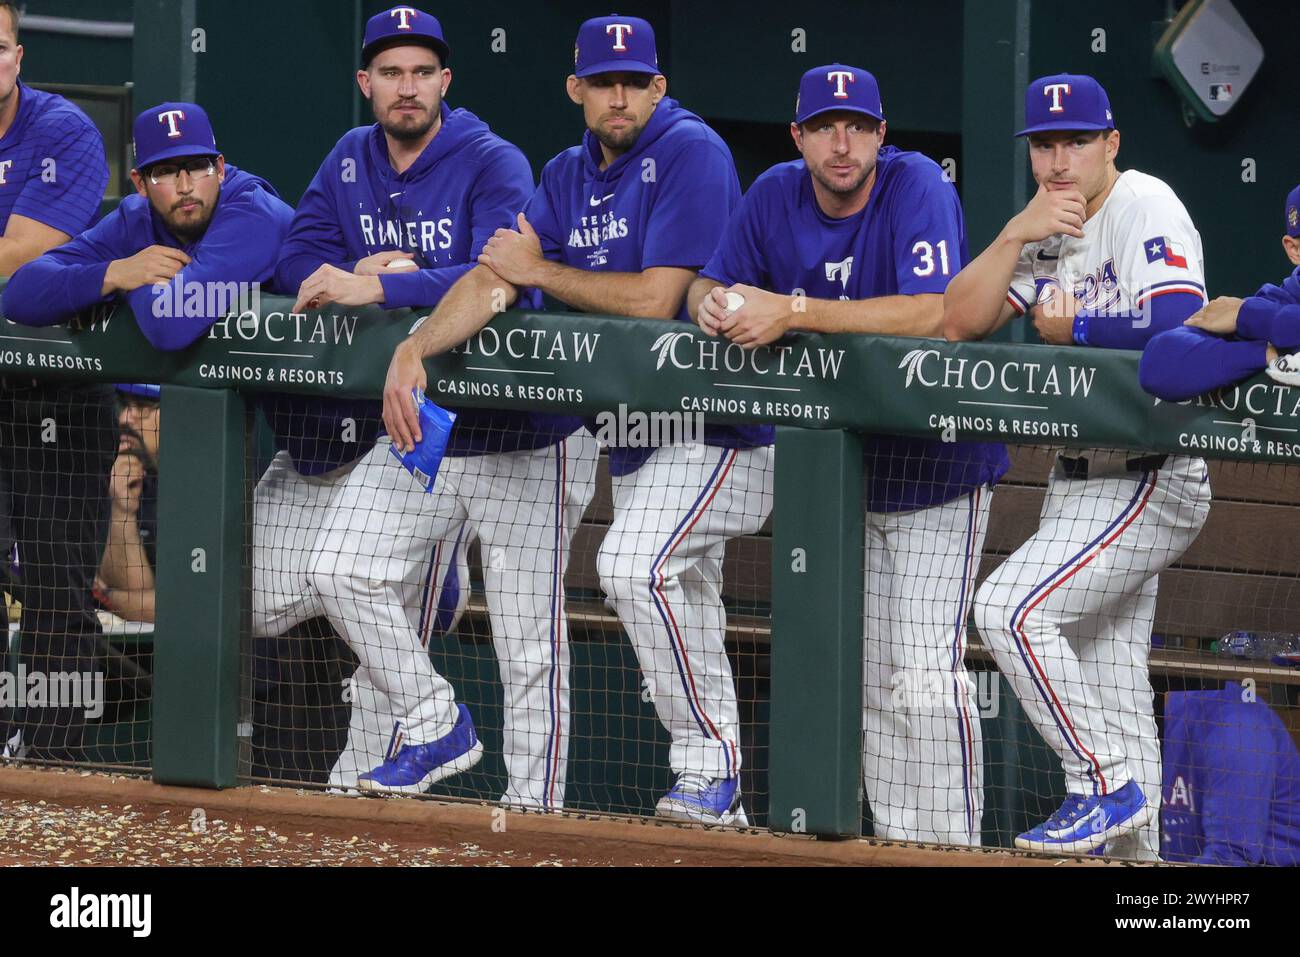 Arlington, Texas, USA. 6th Apr, 2024. Texas Rangers pitchers (from left to right) Dane Dunning (33), Andrew Heaney (44), Nathan Eovaldi (17), and Max Scherzer (31), stand alongside second base Justin Foscue (56) during the Major League Baseball game between the Houston Astros and Texas Rangers at Globe Life Field in Arlington, Texas. Rangers defeated Astros 7-2. Greg Atkins/CSM/Alamy Live News Stock Photo